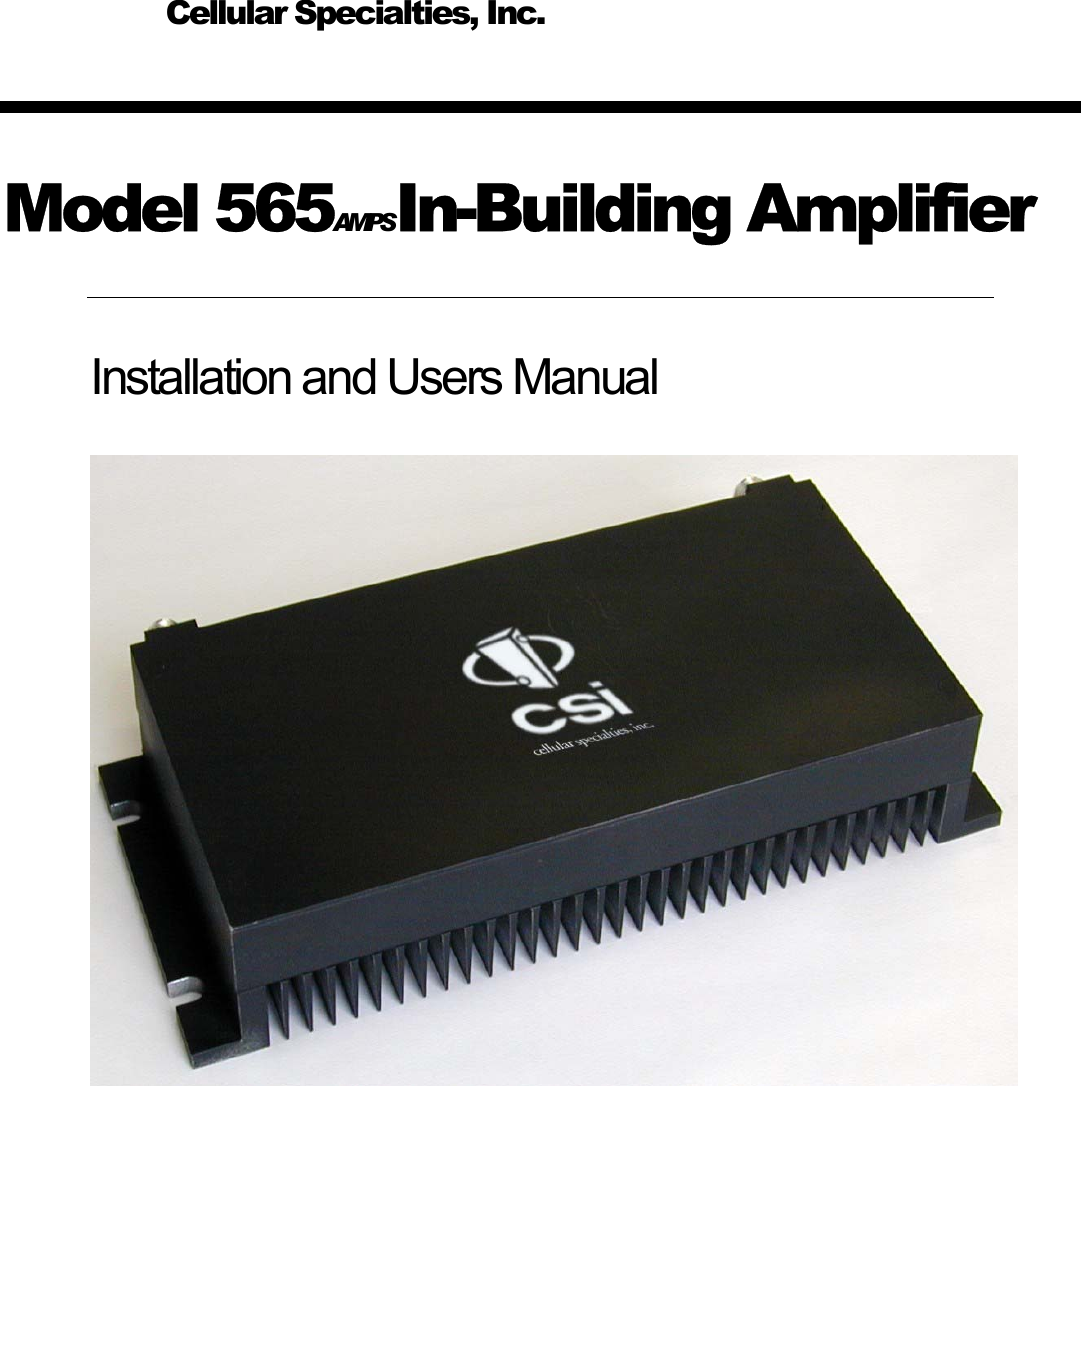   Cellular Specialties, Inc.  Model 565AMPS In-Building Amplifier Installation and Users Manual       